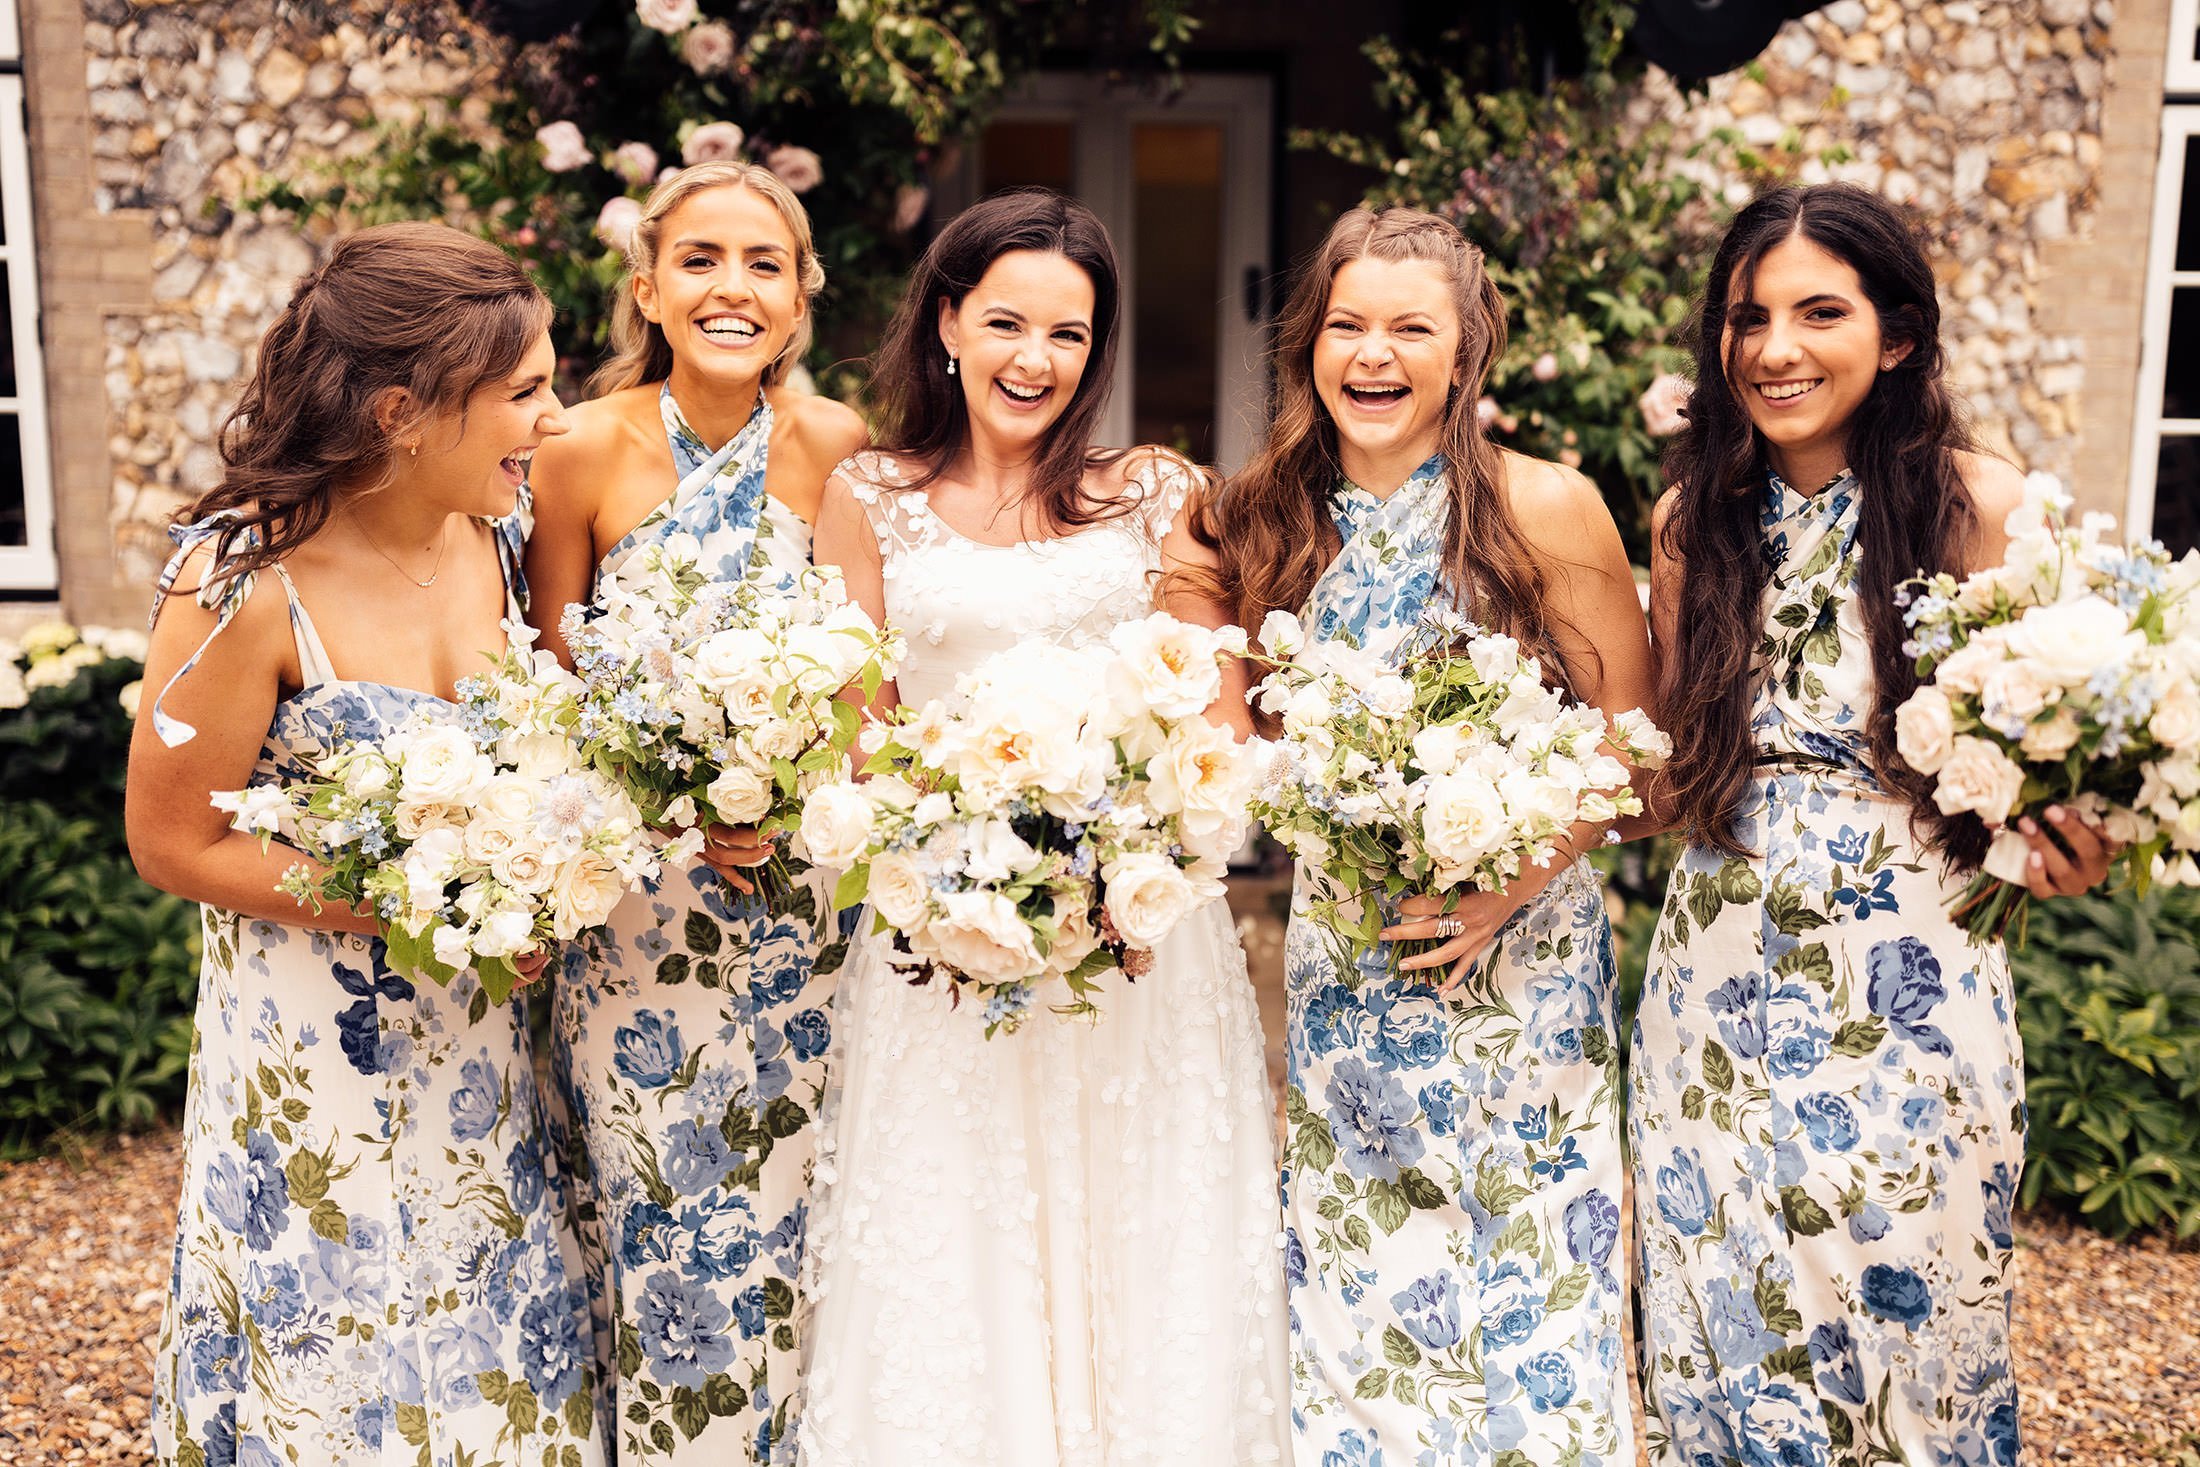 relaxed photo with bride and bridesmaids 